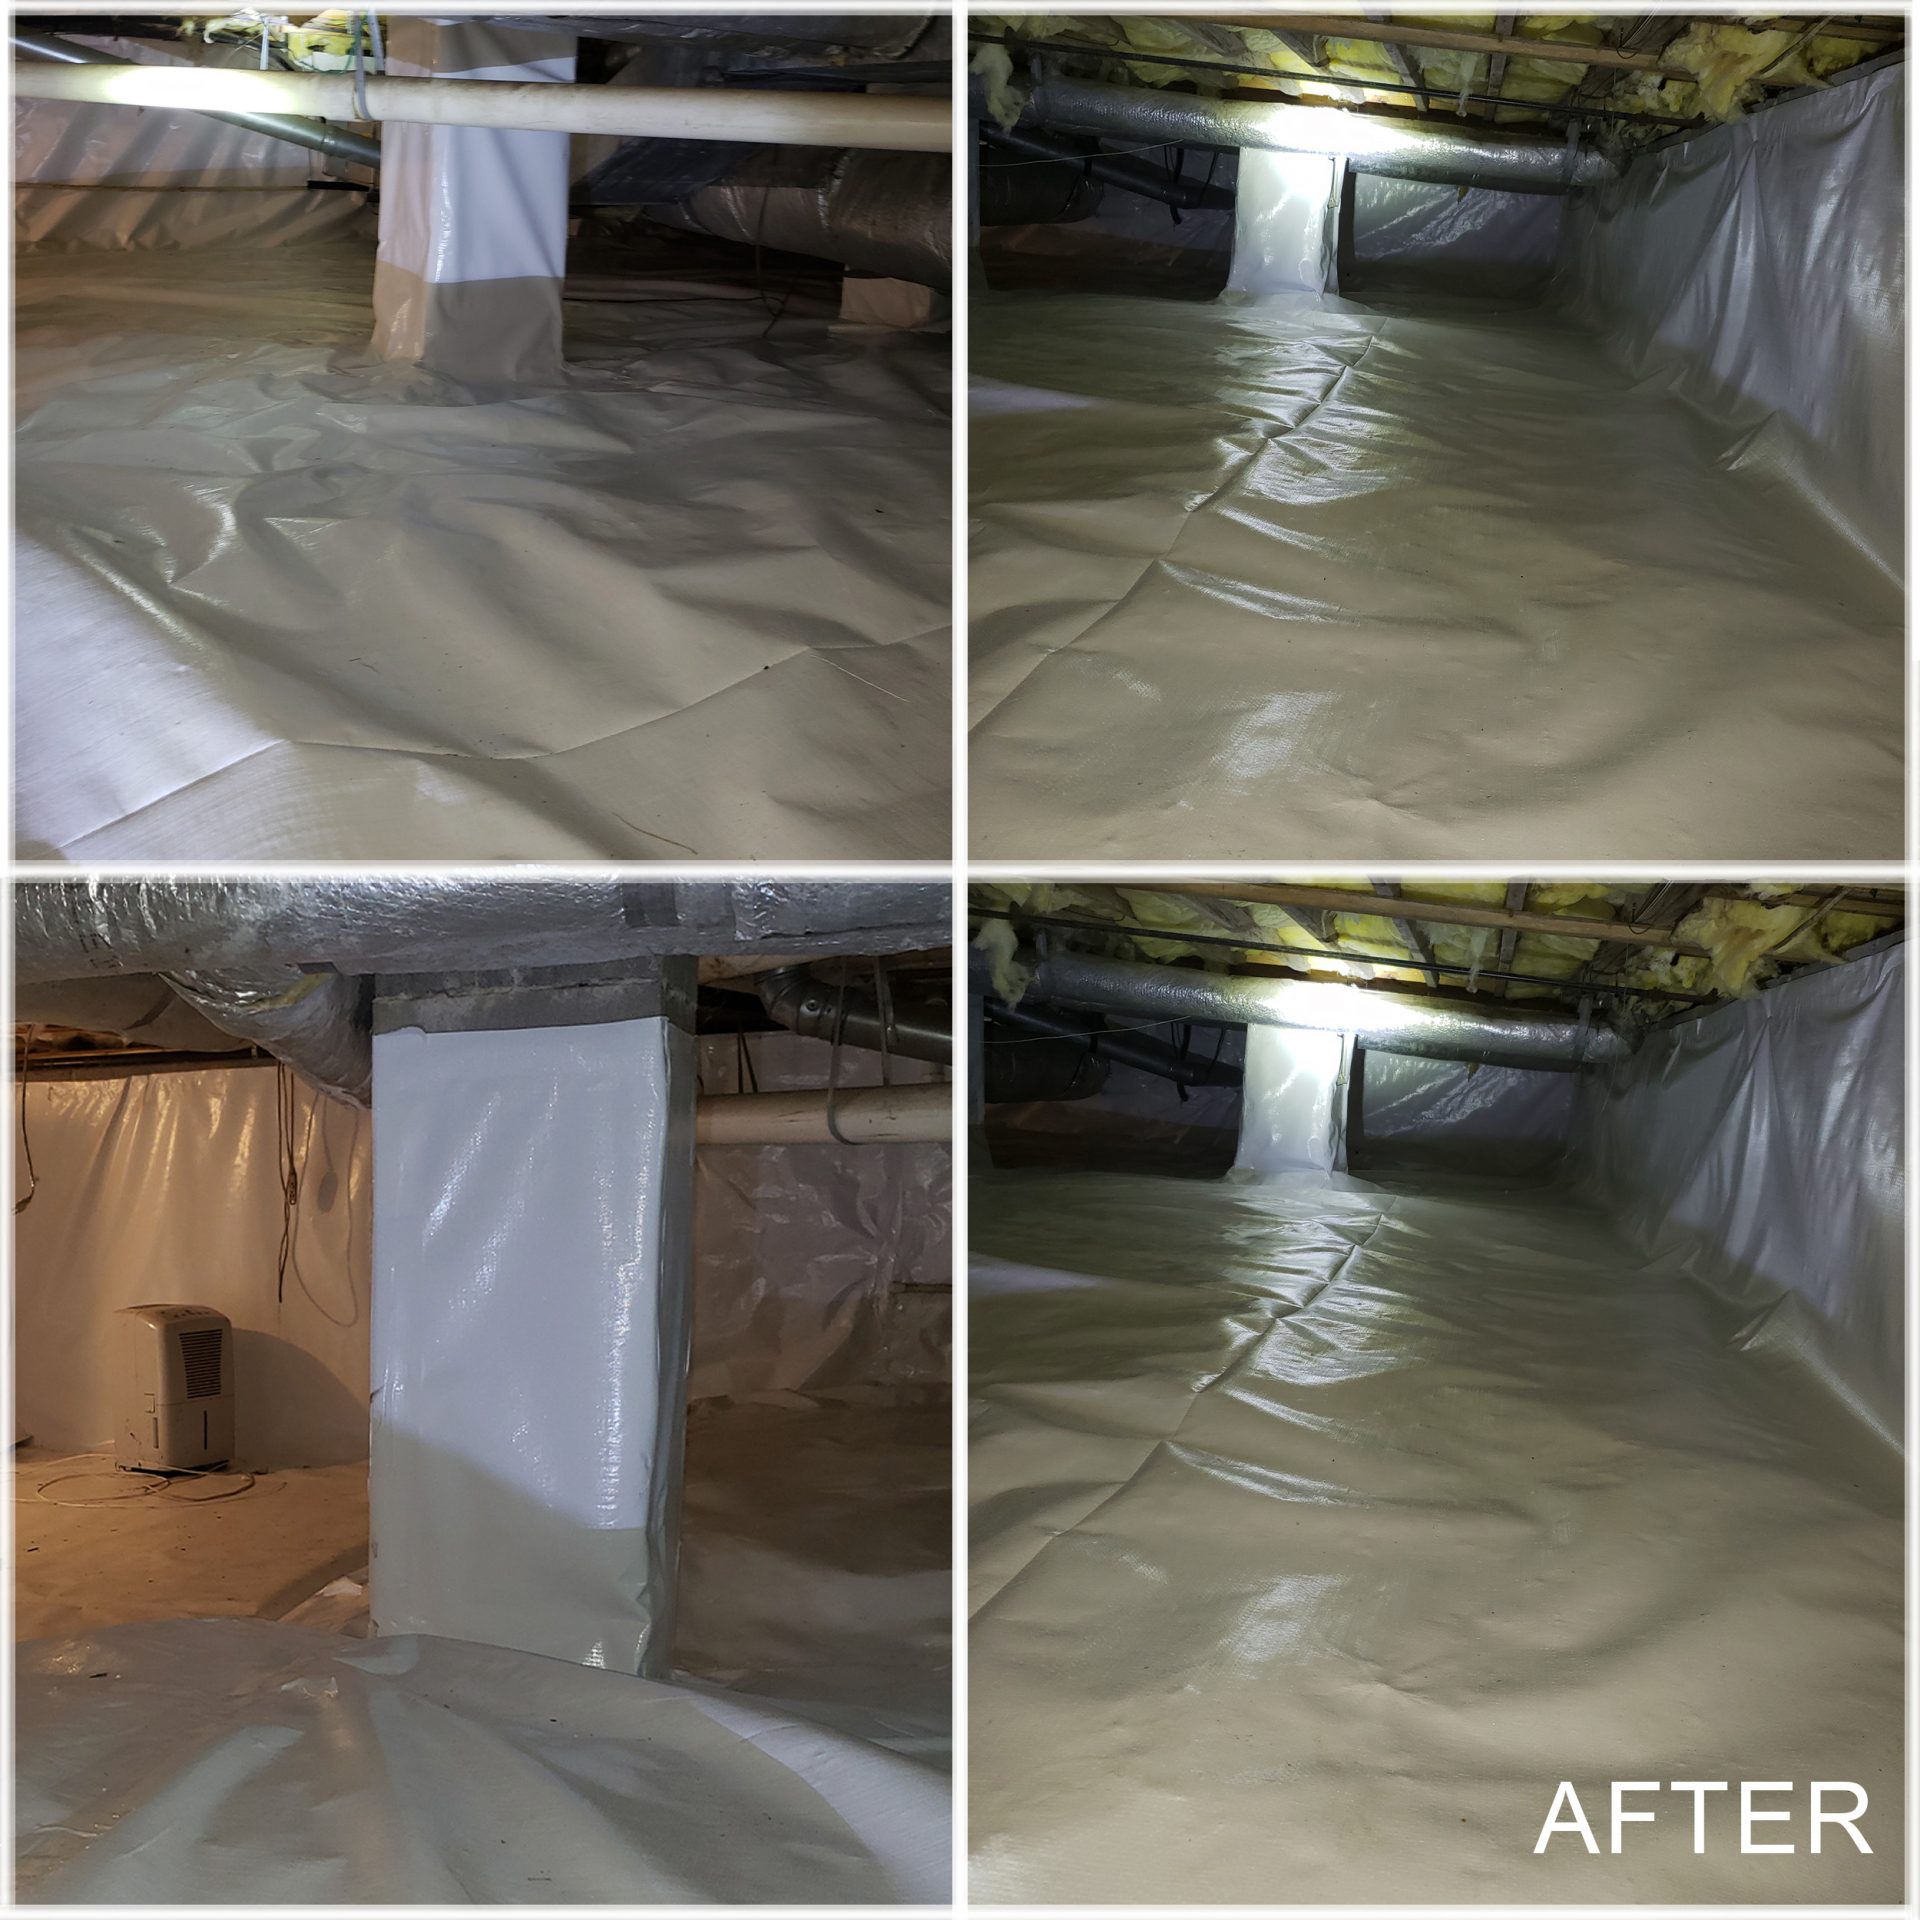 A Completed Under Crawl Encapsulation by Pest Shield